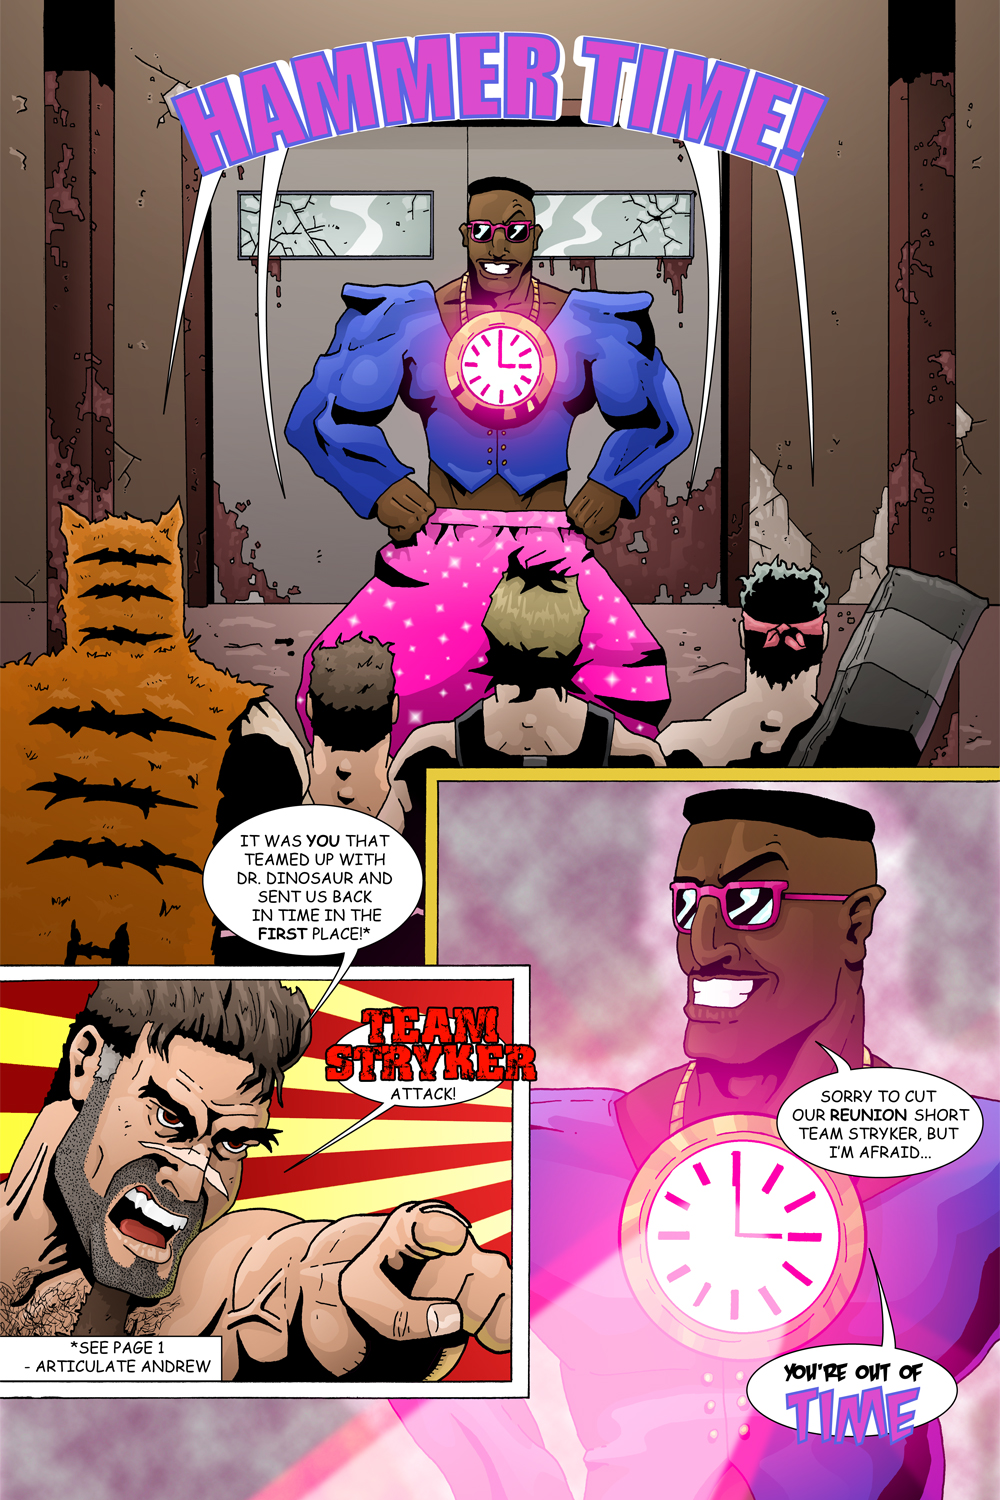 MISSION 003: PAGE 30 “SEE PAGE 1”